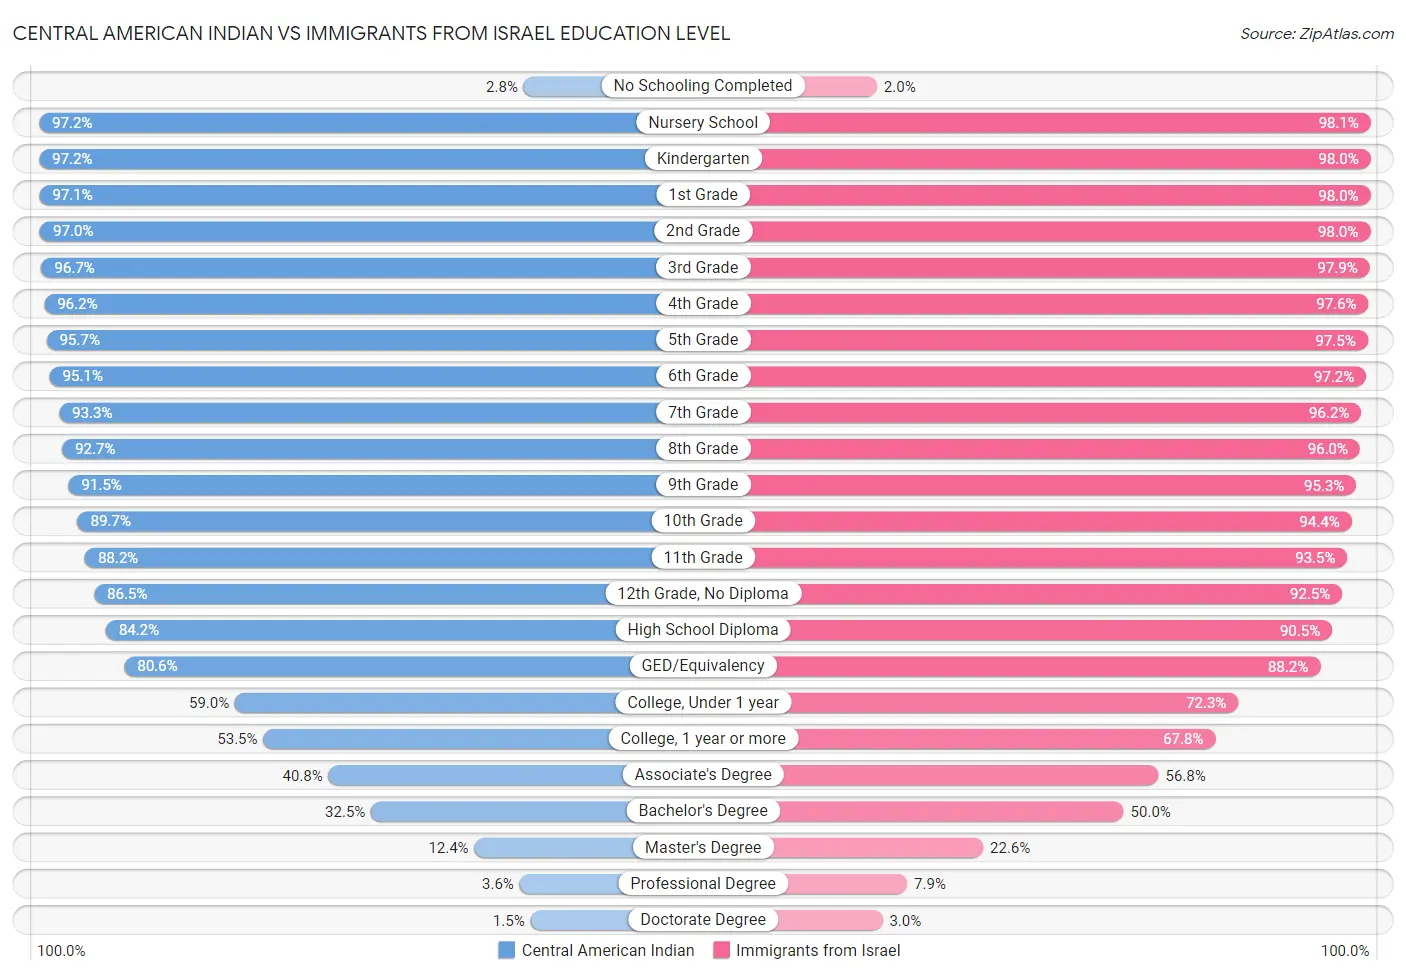 Central American Indian vs Immigrants from Israel Education Level